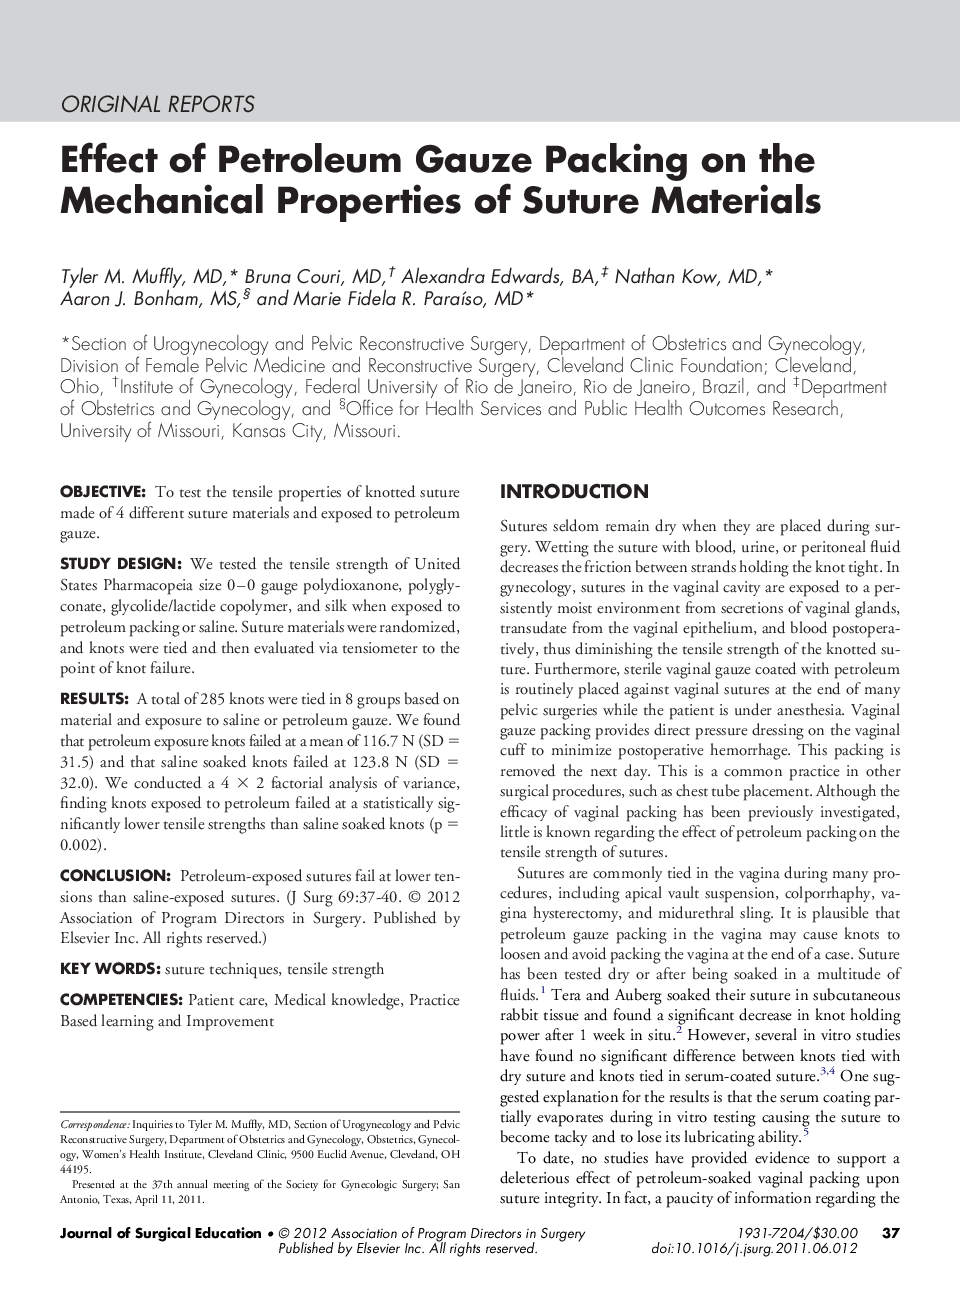 Effect of Petroleum Gauze Packing on the Mechanical Properties of Suture Materials